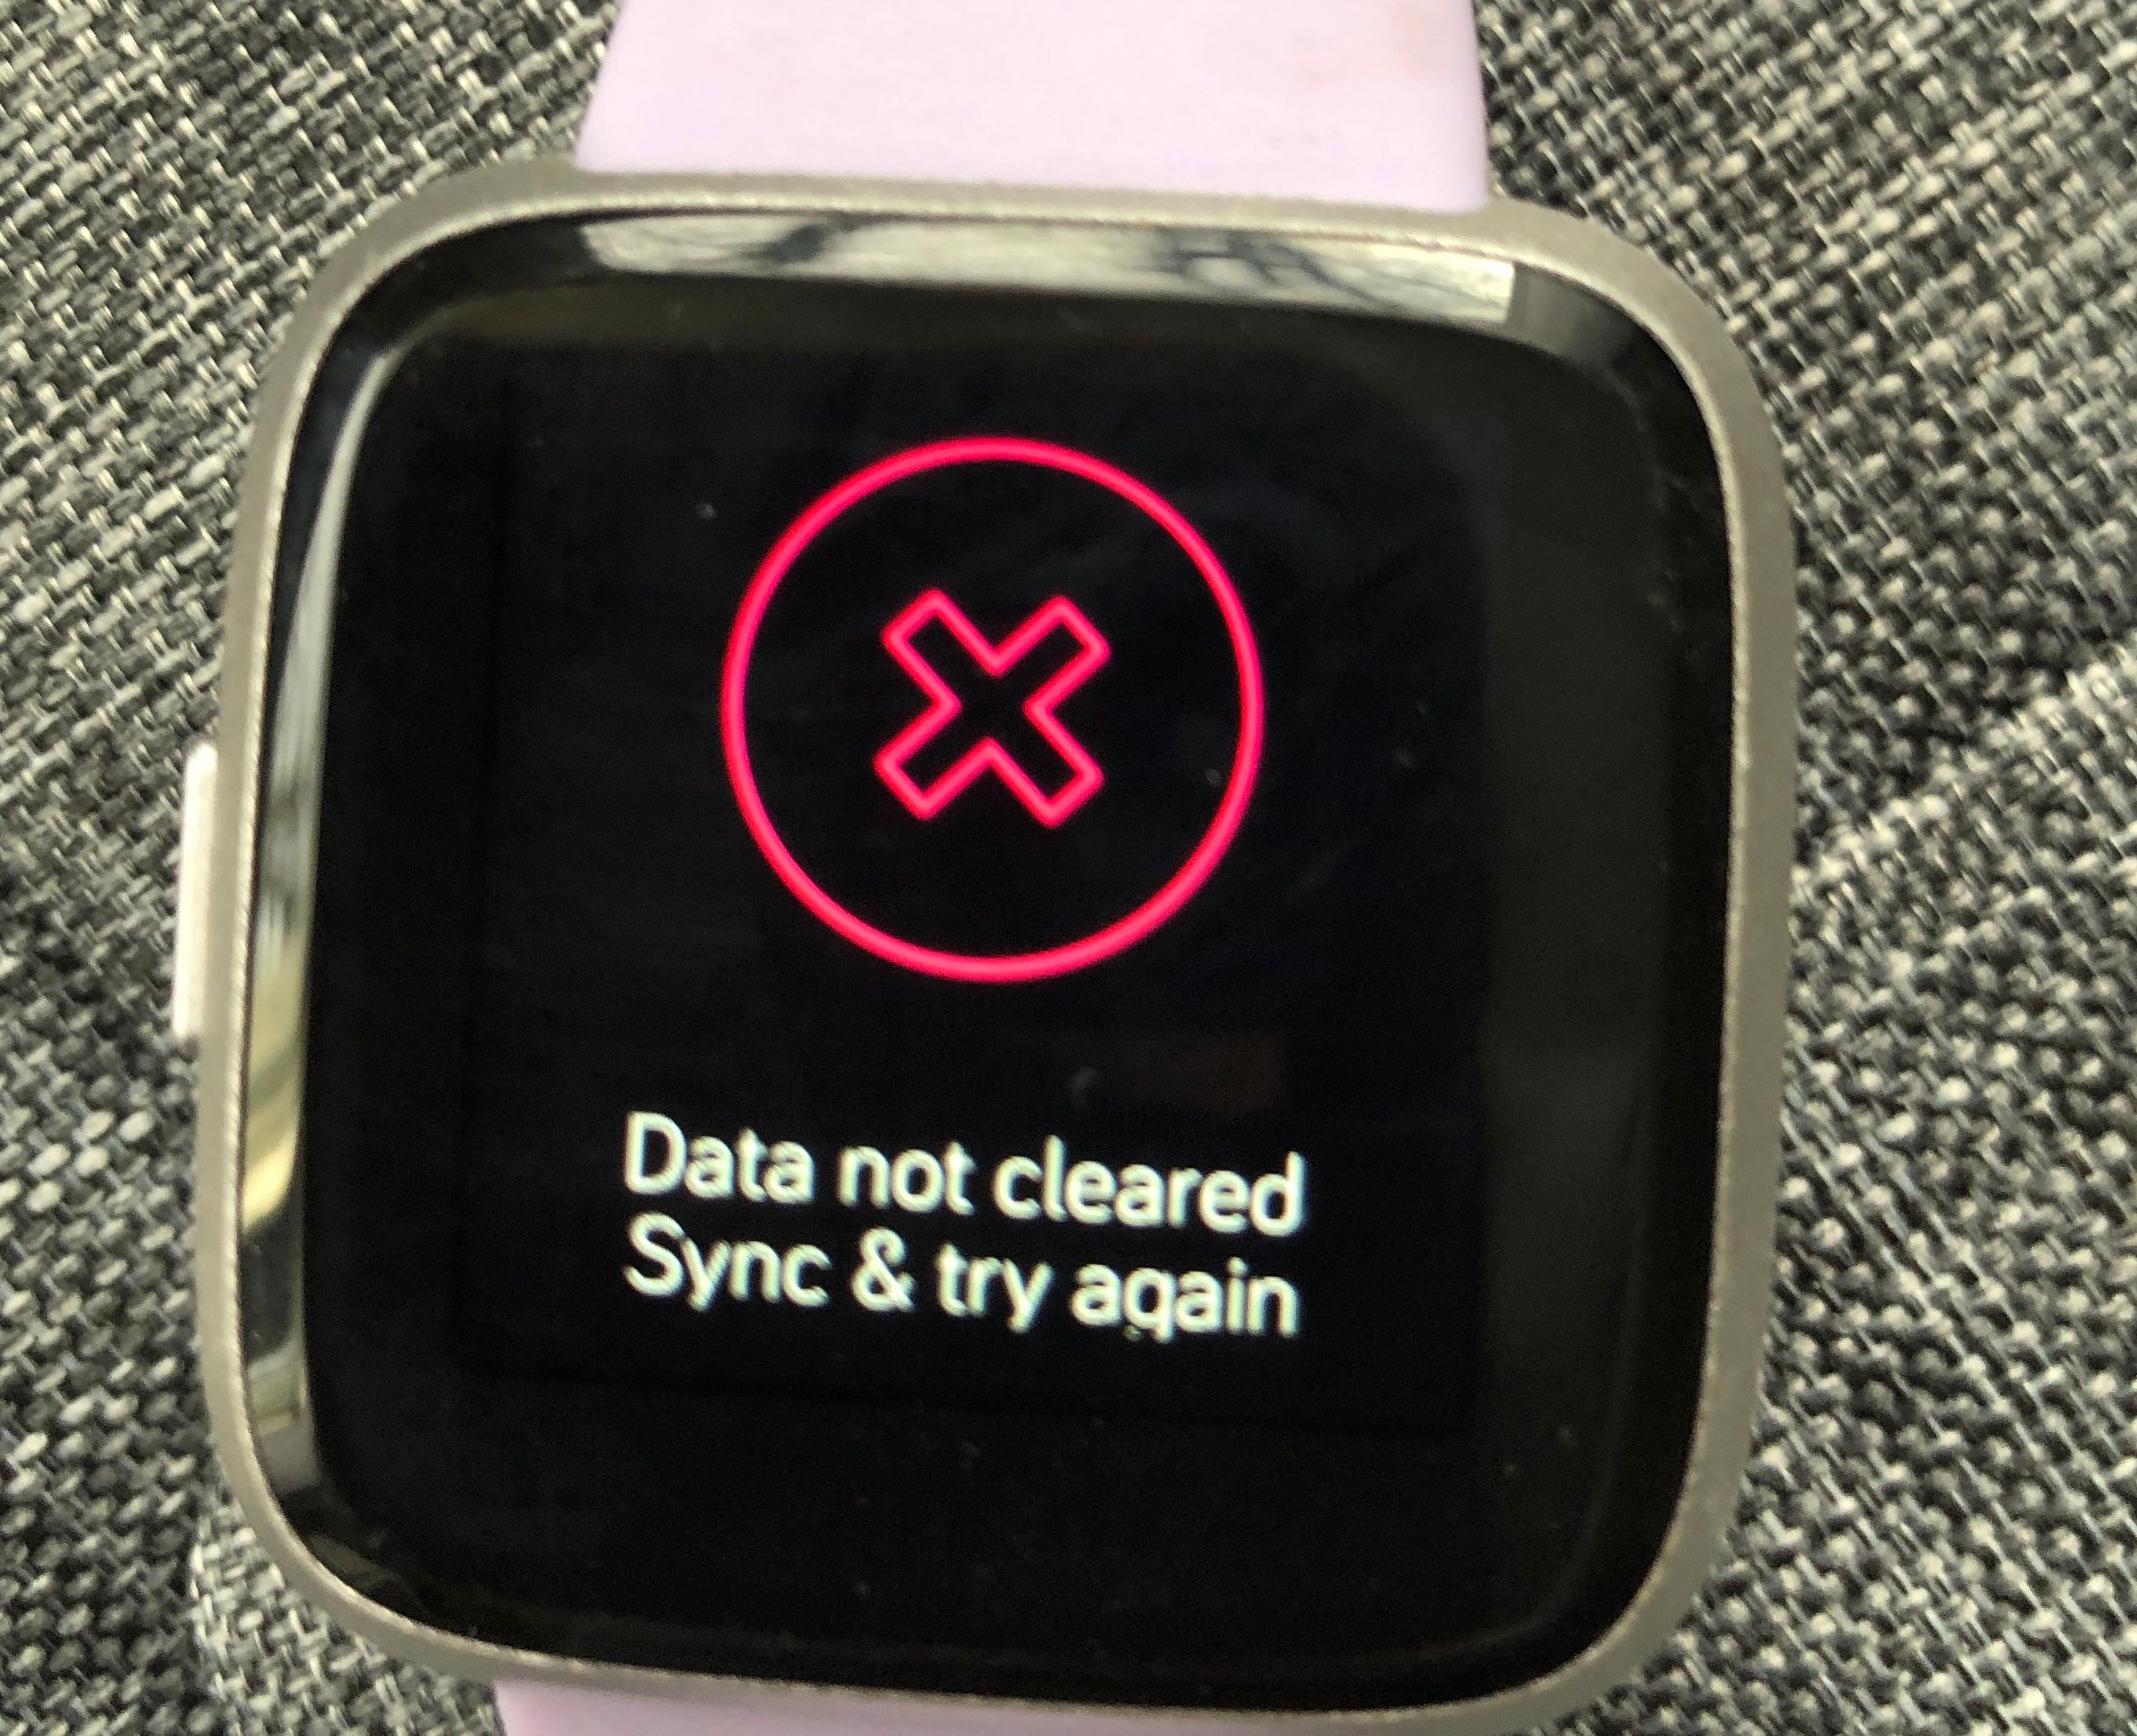 how to clear data on fitbit versa lite